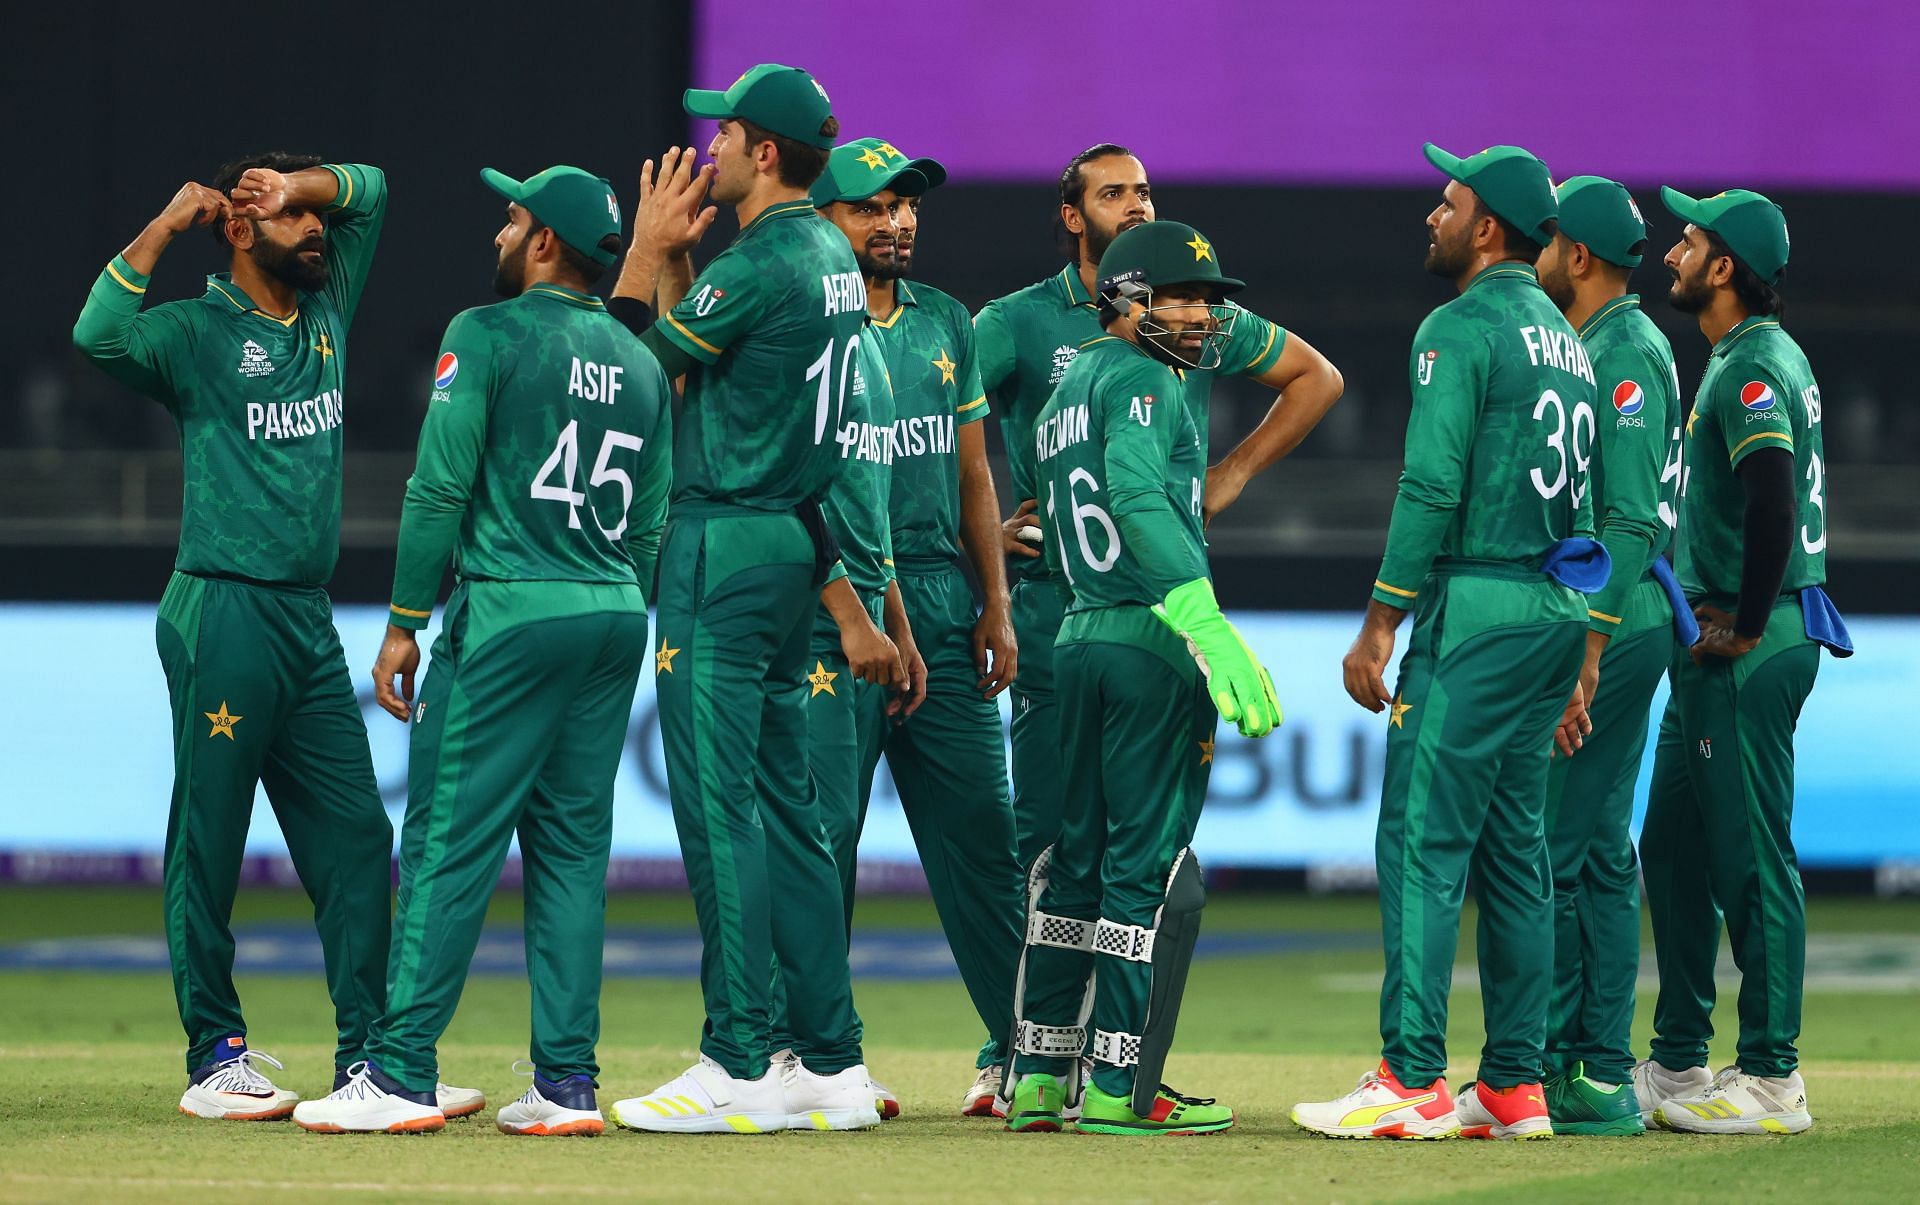 Pakistan will be facing New Zealand in their second match on Tuesday, October 26th.